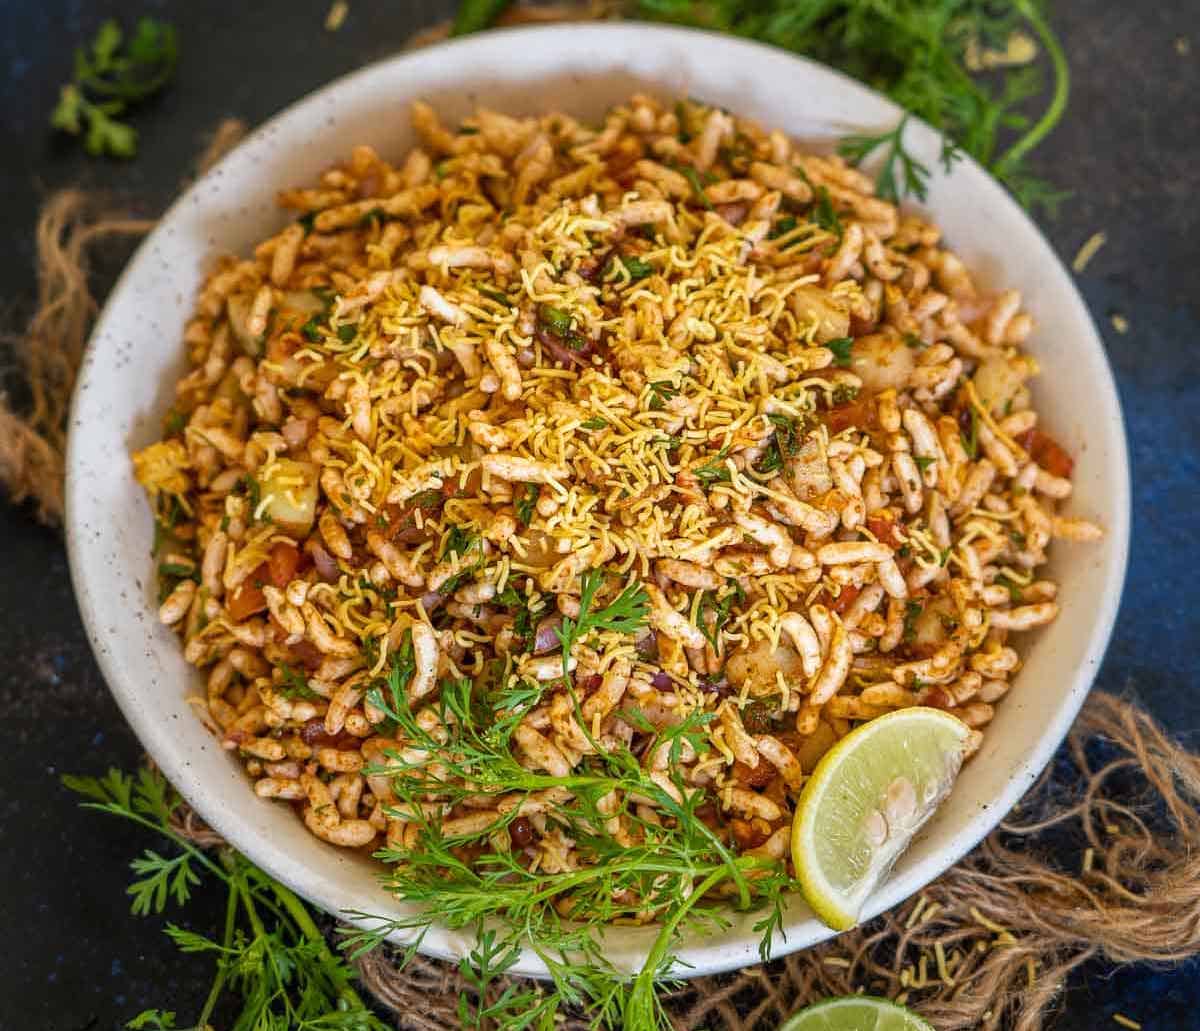 Bhelpuri in a white bowl with lemon slice on the side